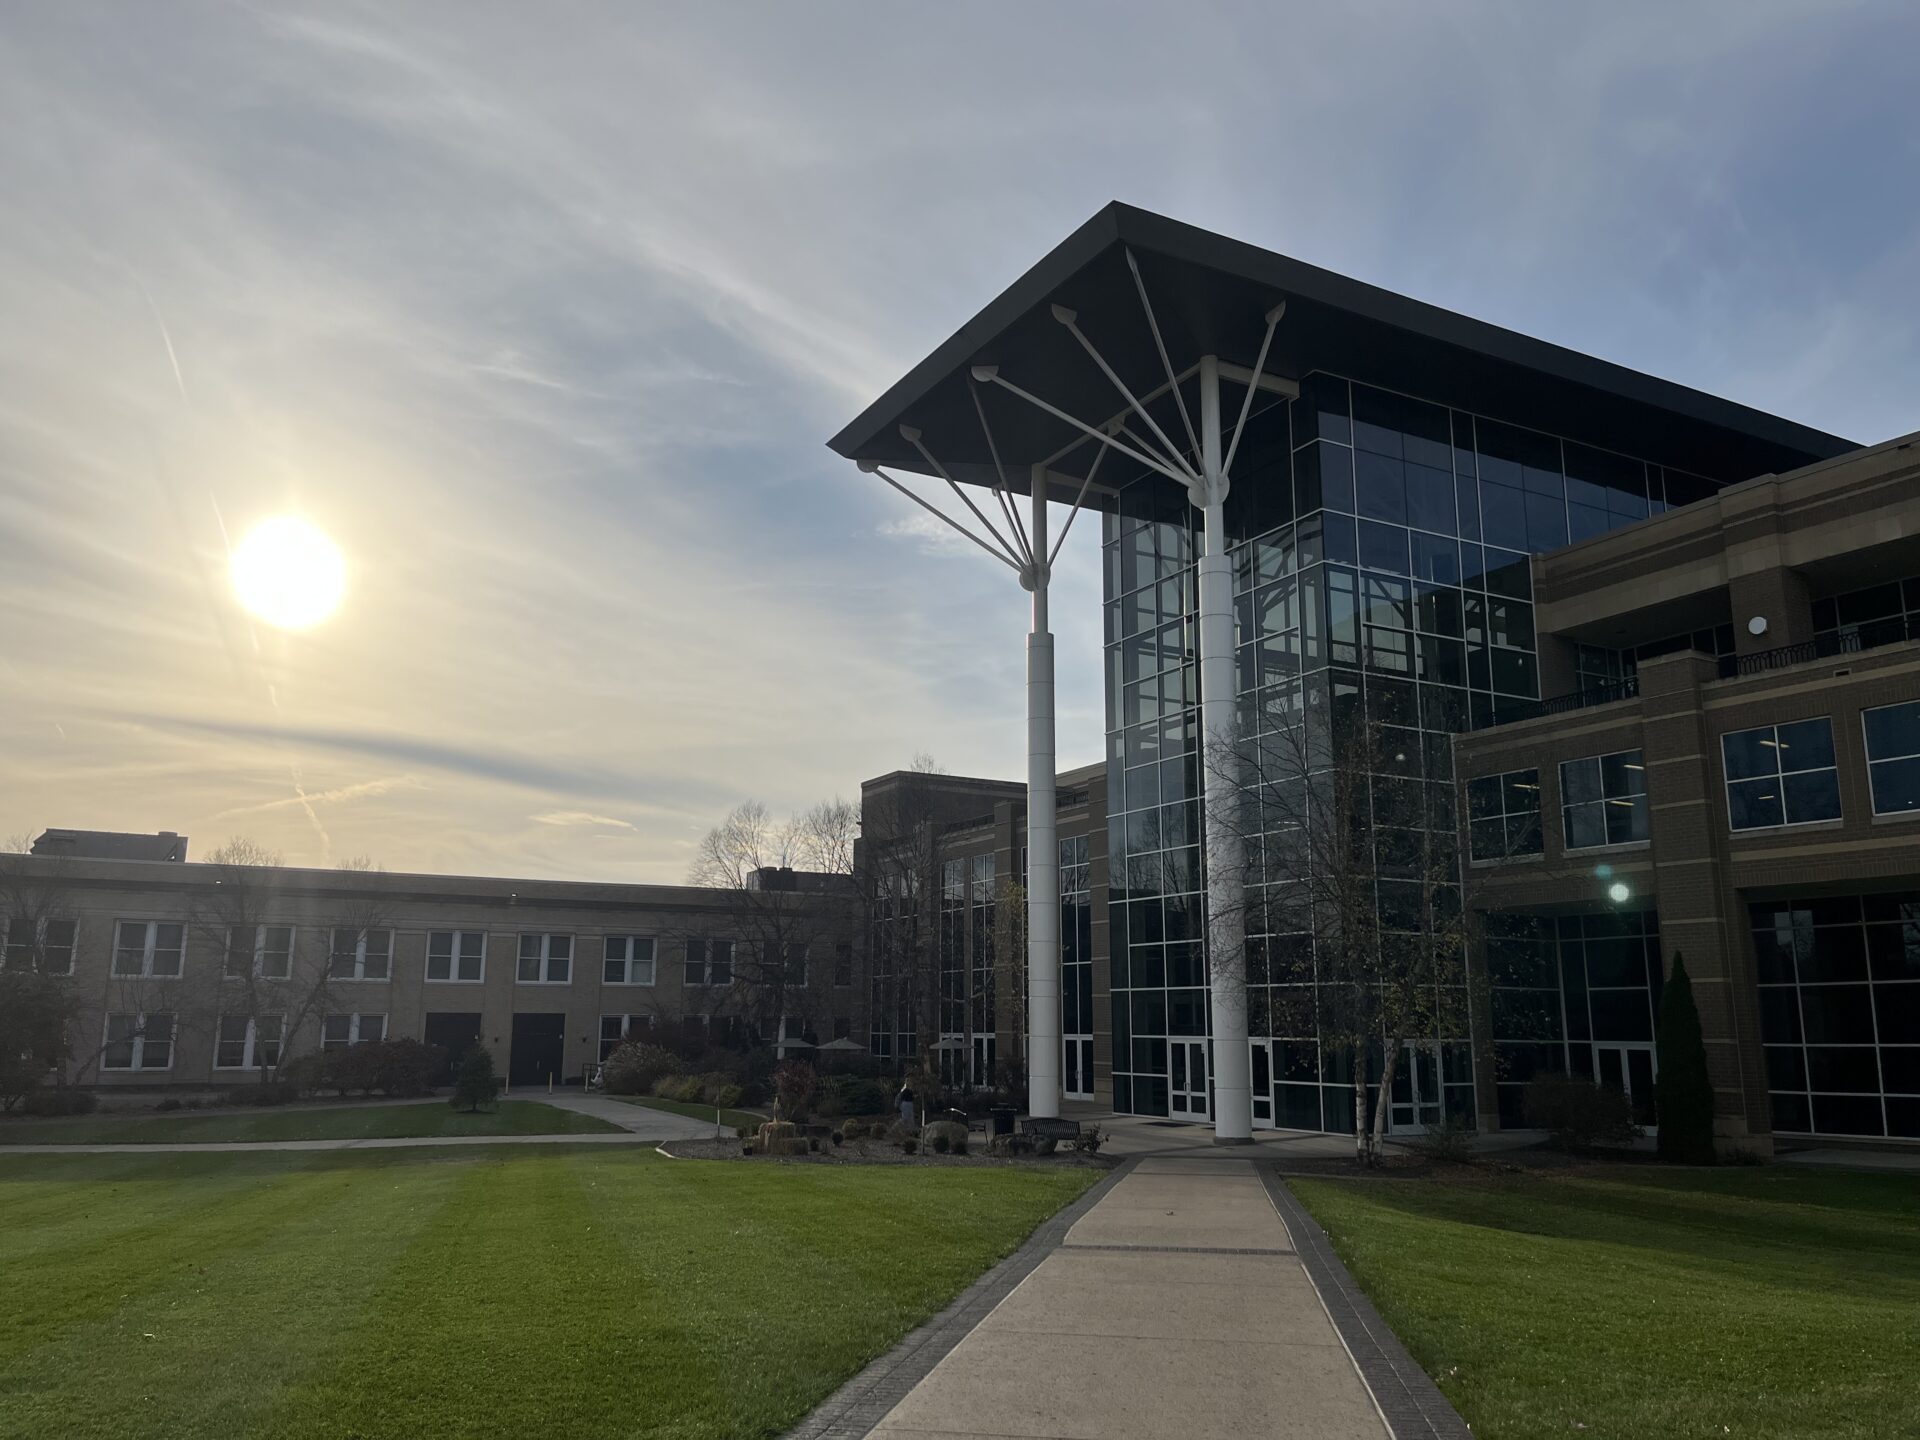 The sun sets over Fairmont State University's campus. A building with two tall columns and long, glass panes out front reflects the sunset. A cement path cuts through a grass quad, leading to the building.